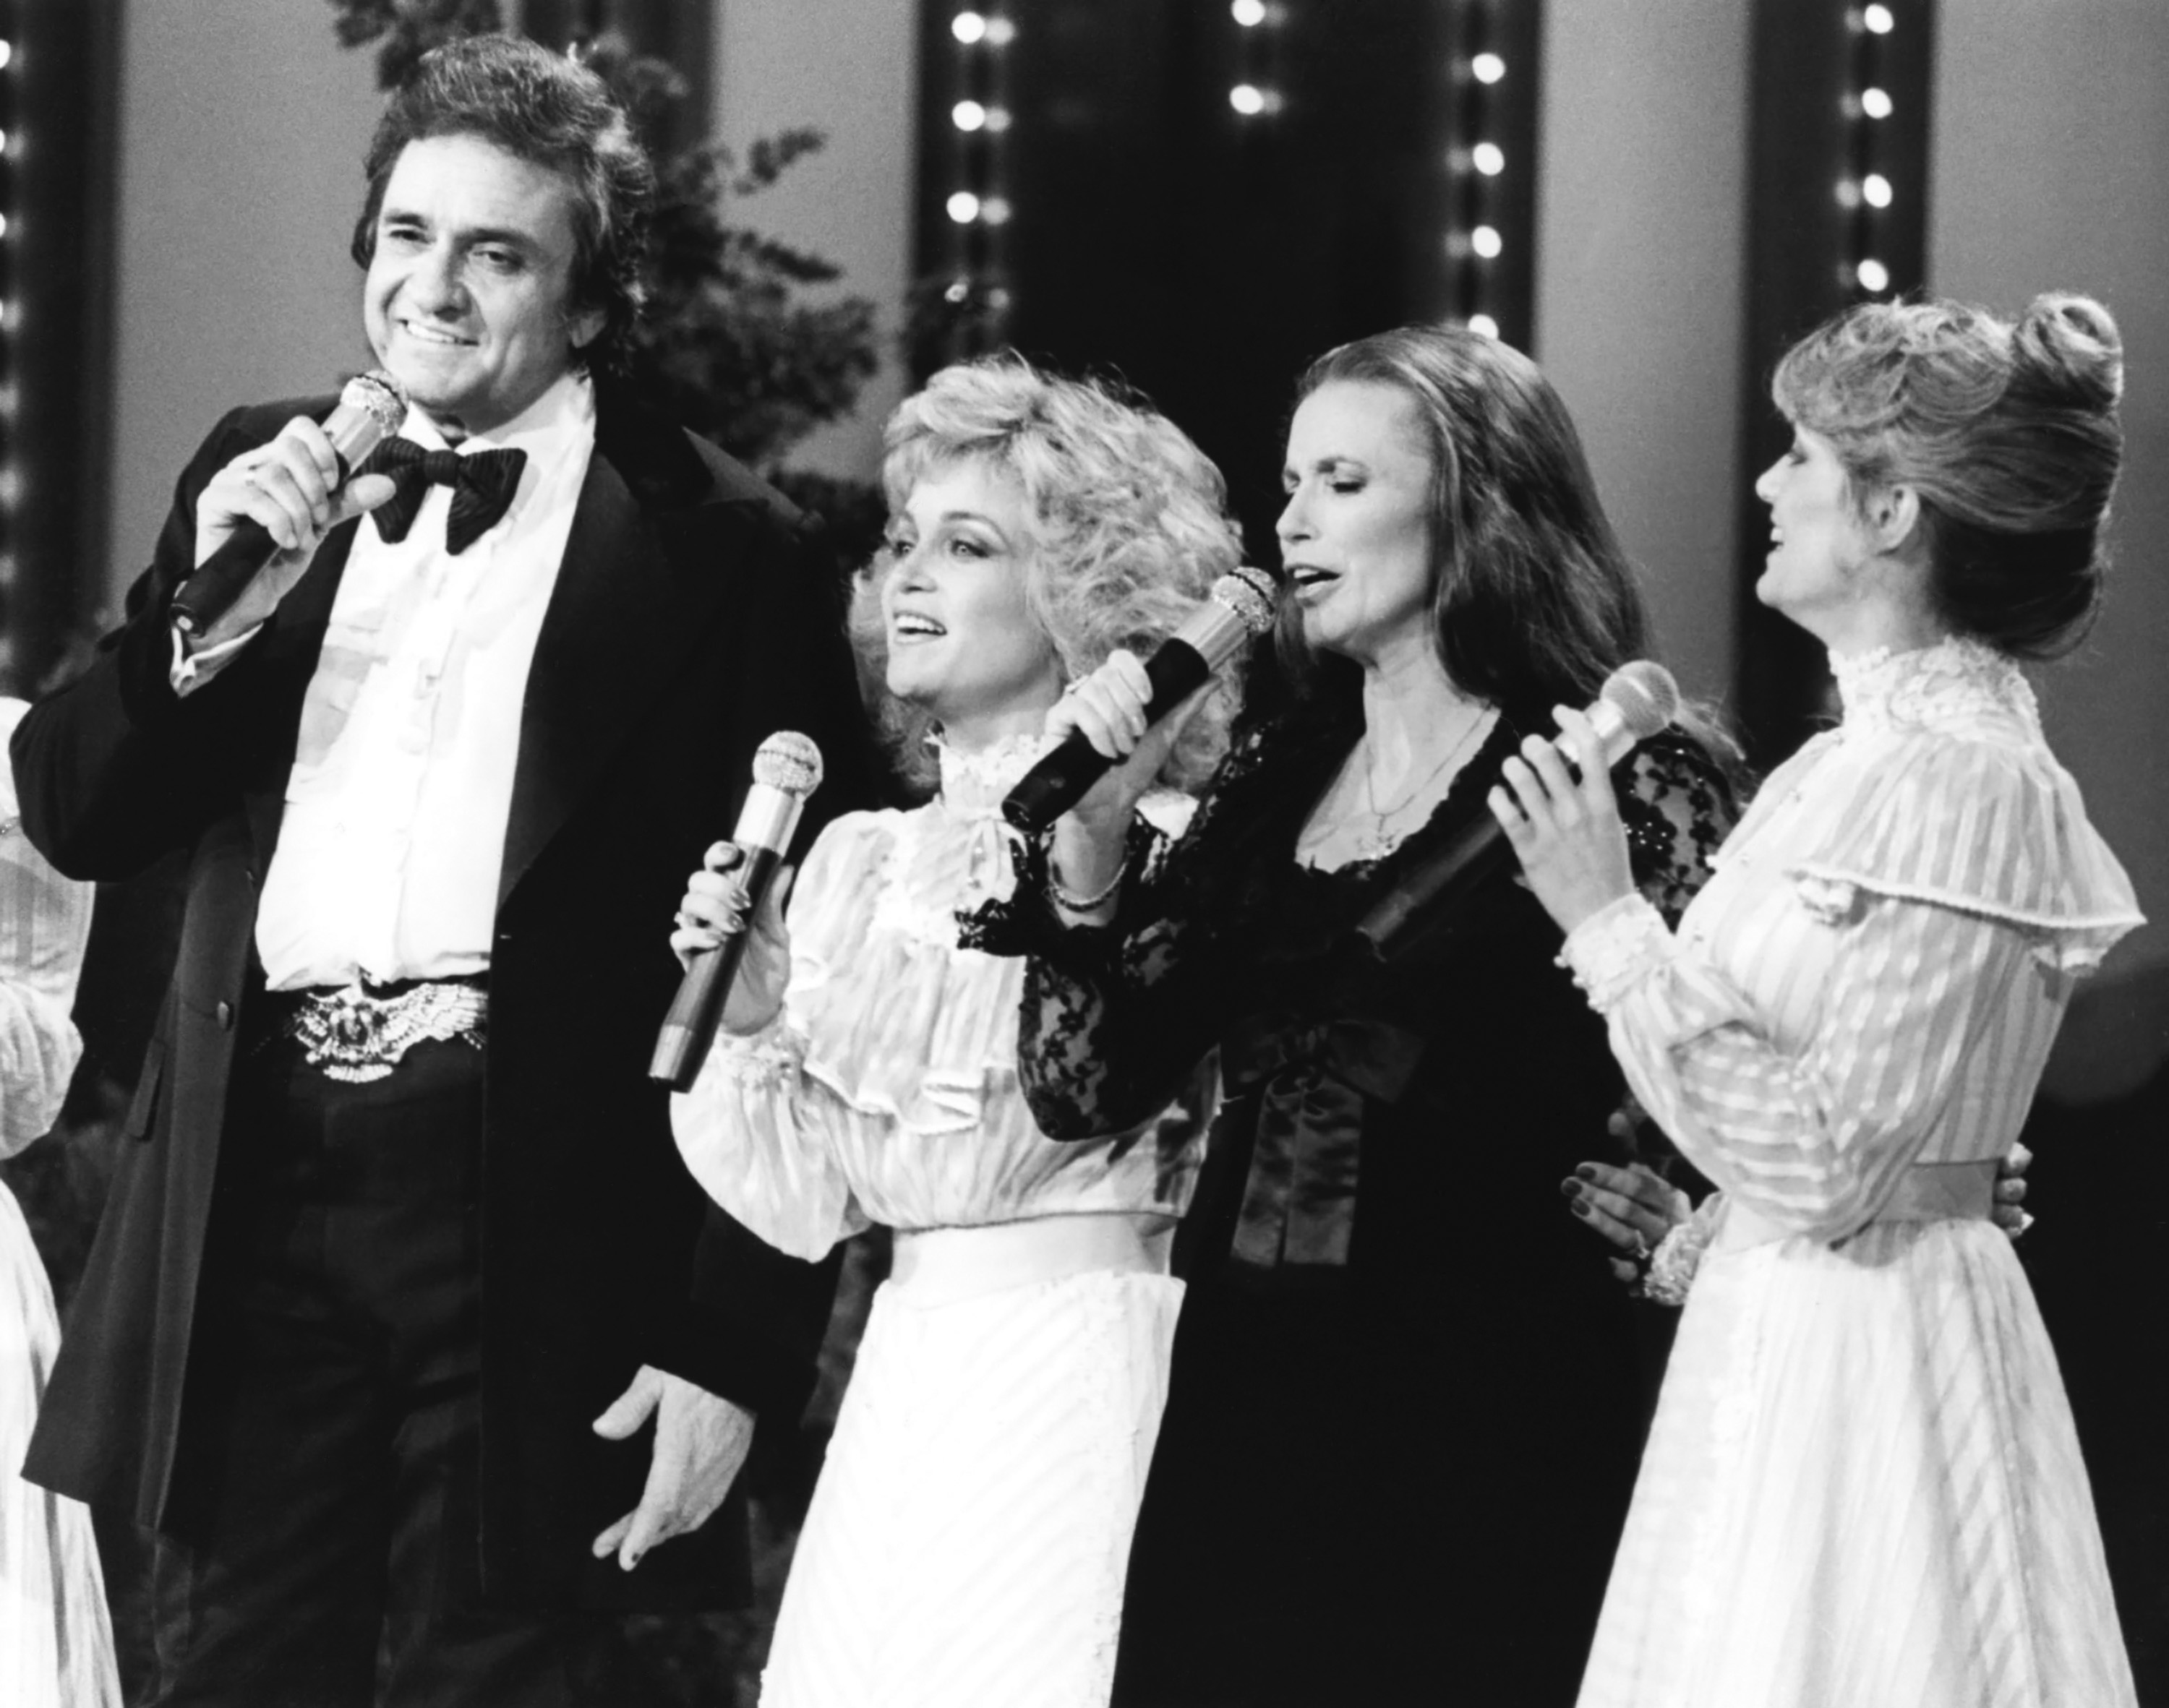 Johnny Cash, Barbara Mandrell, June Carter Cash, Irlene Mandrell, and Louise Mandrell in 1980. | Source: Getty Images